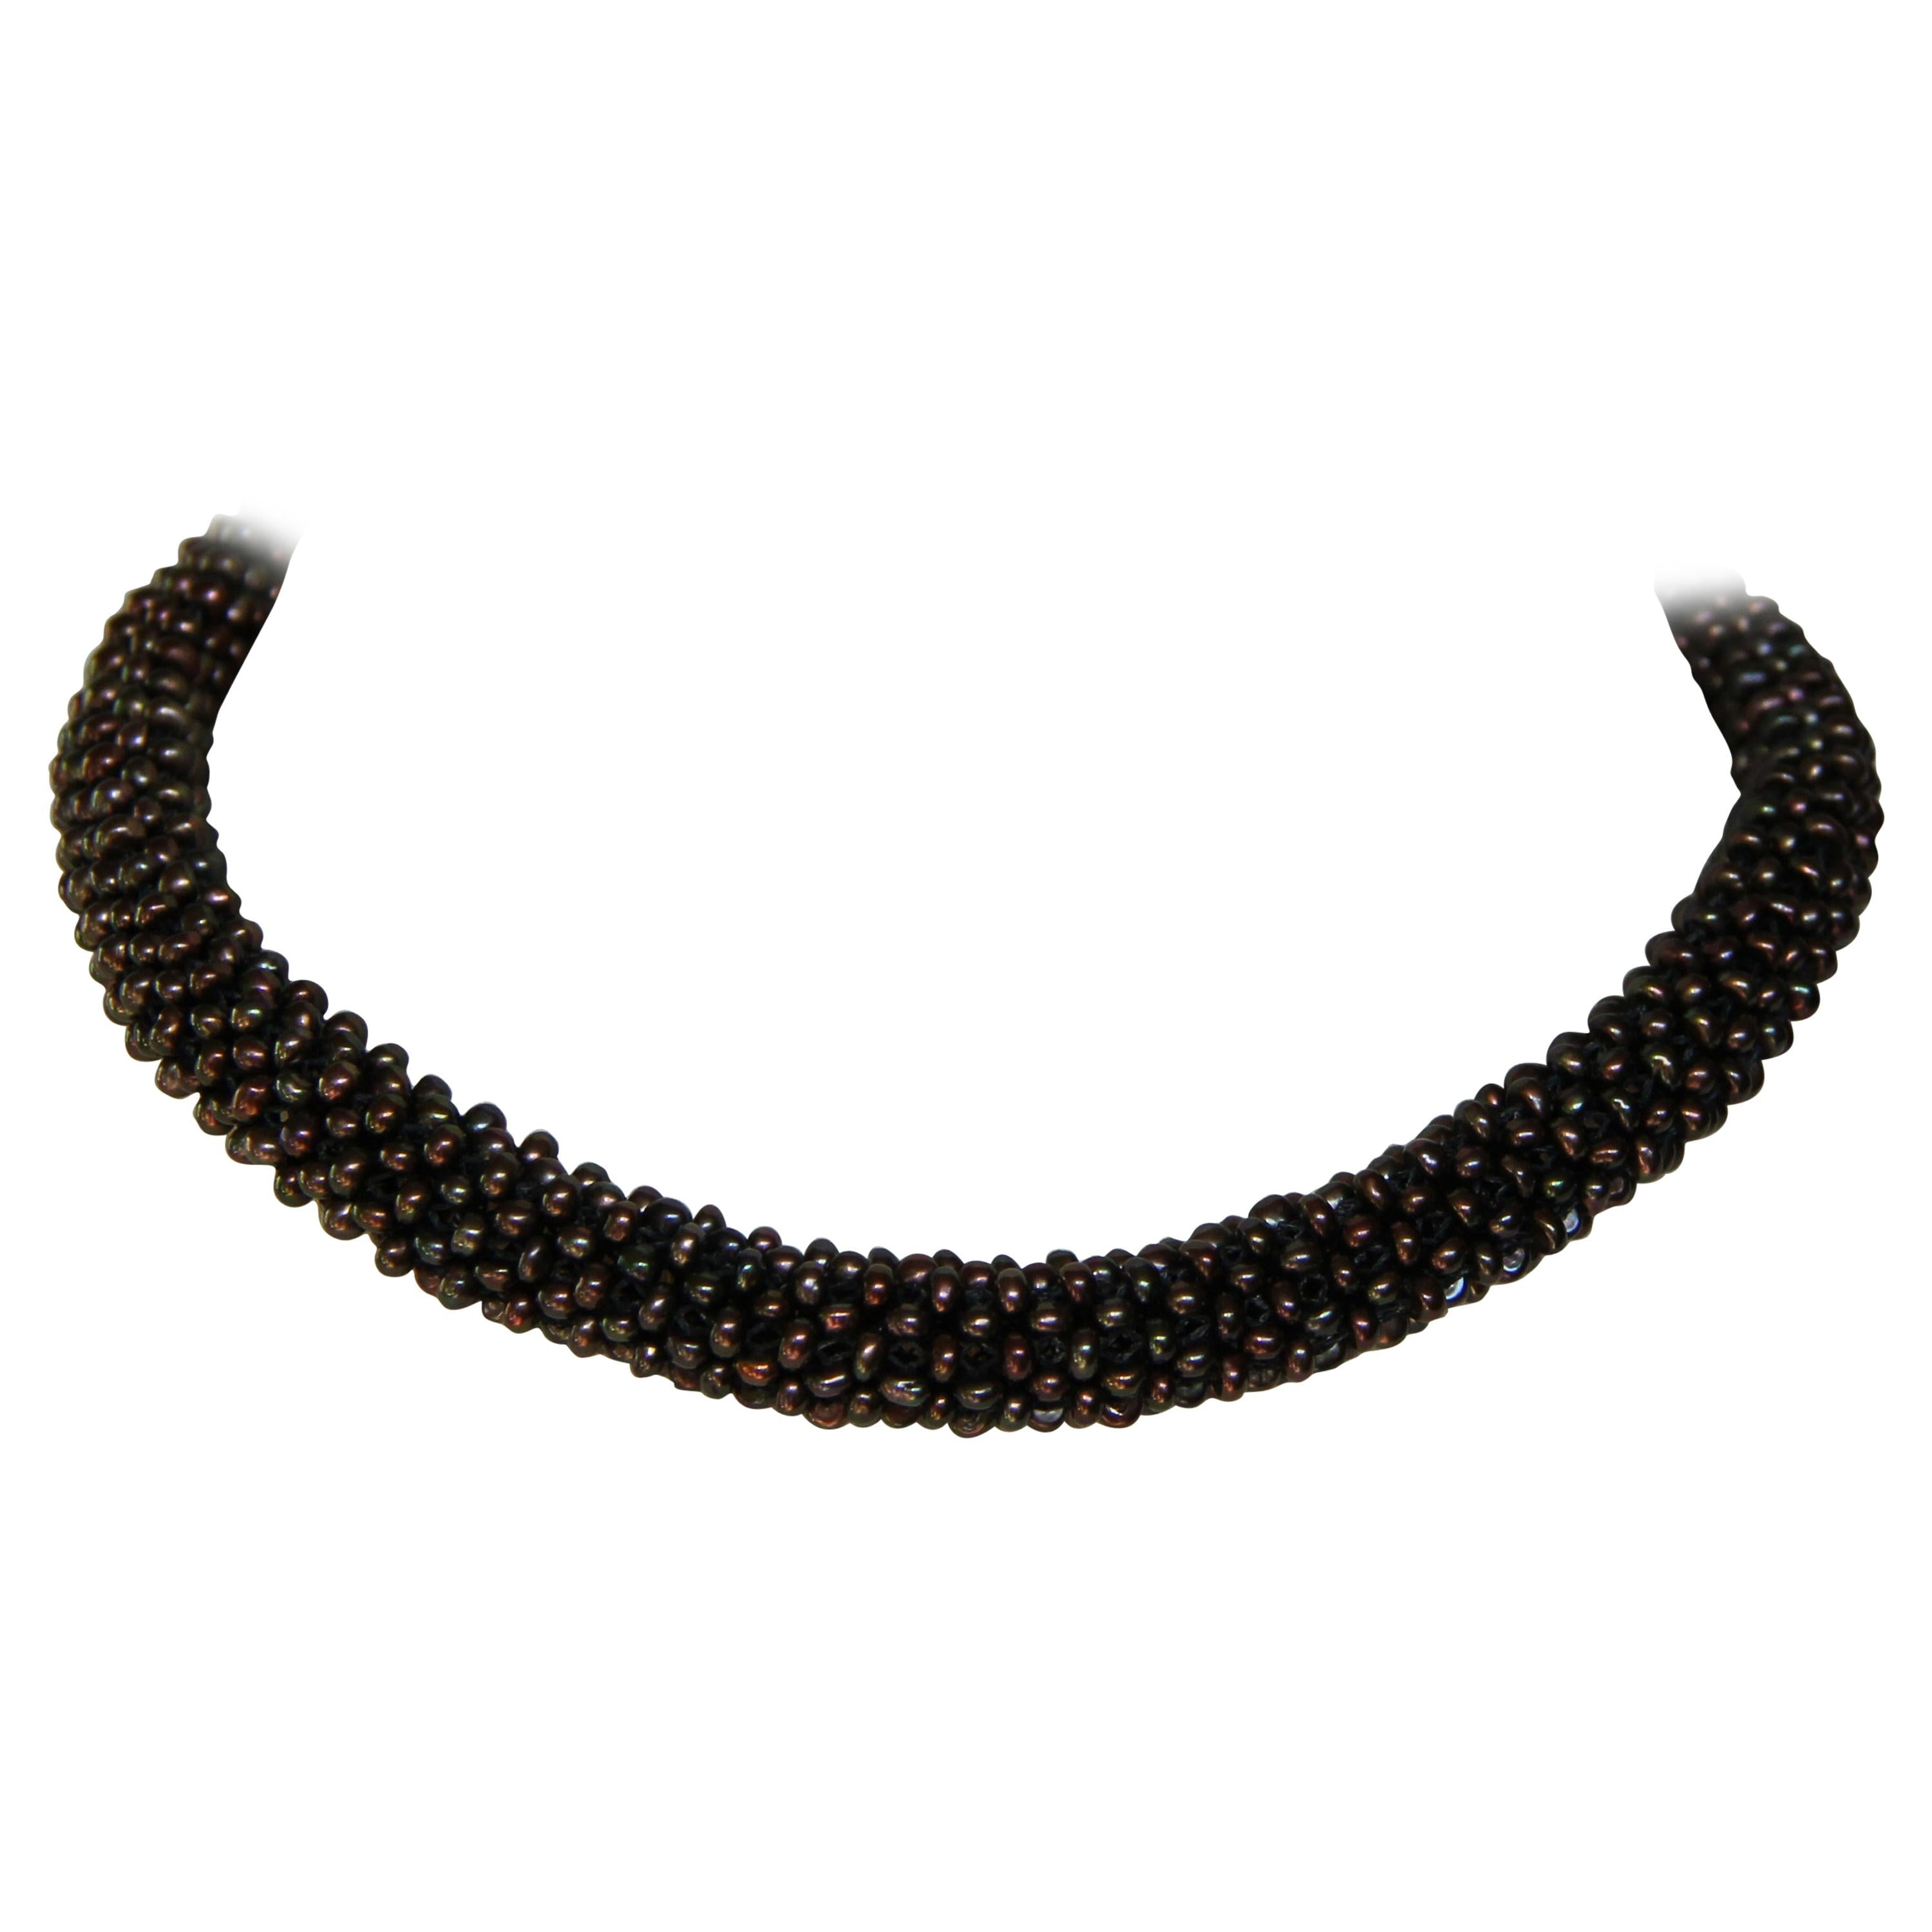 Marina J 3-D (rope like) Unique Black Pearl Necklace with 14 k Yellow Gold Clasp